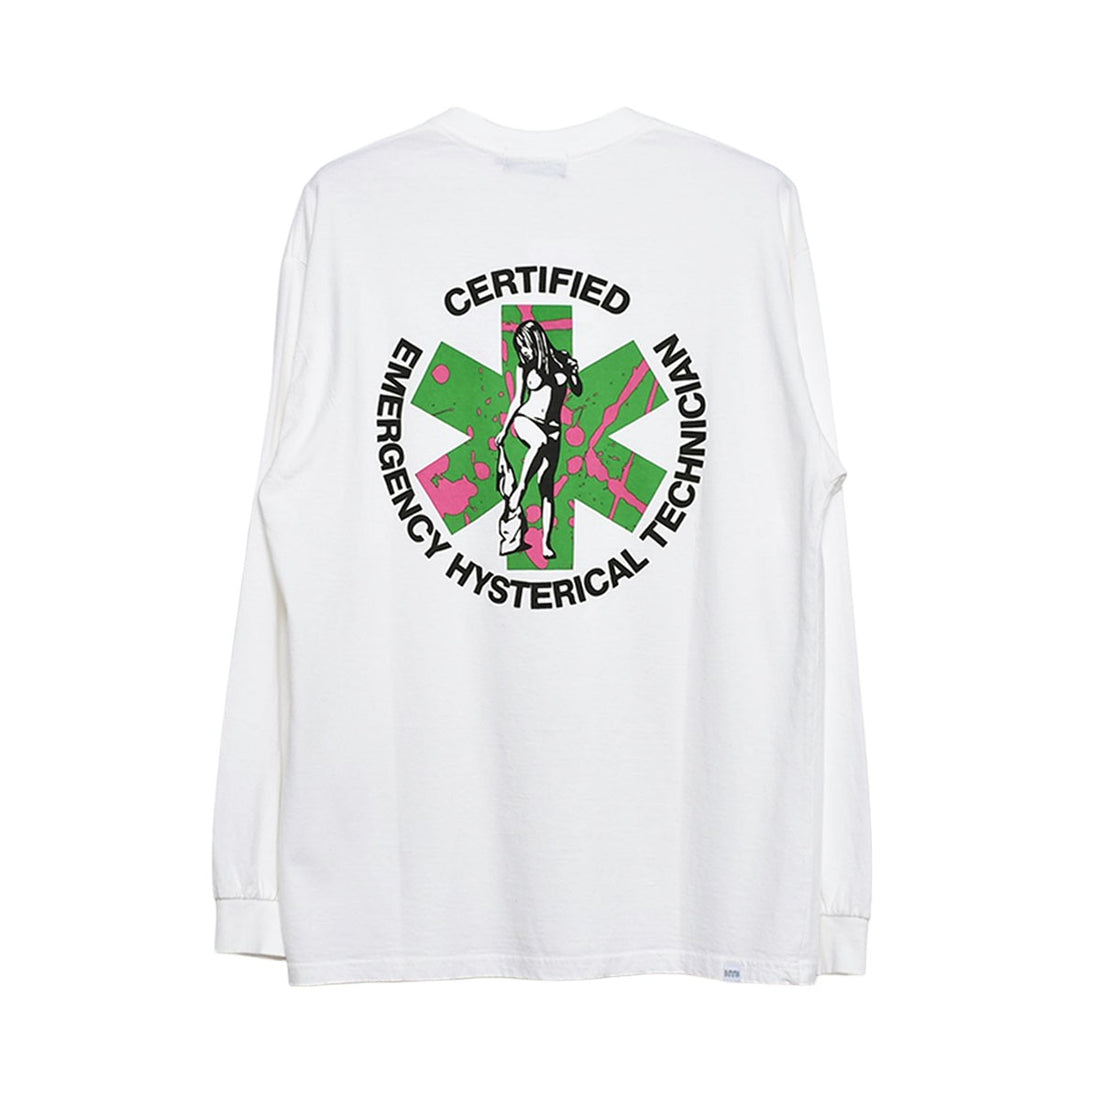 [HYSTERIC GLAMOUR]HYSTERICAL TECHNICIAN Tシャツ/WHITE(02241CL07)